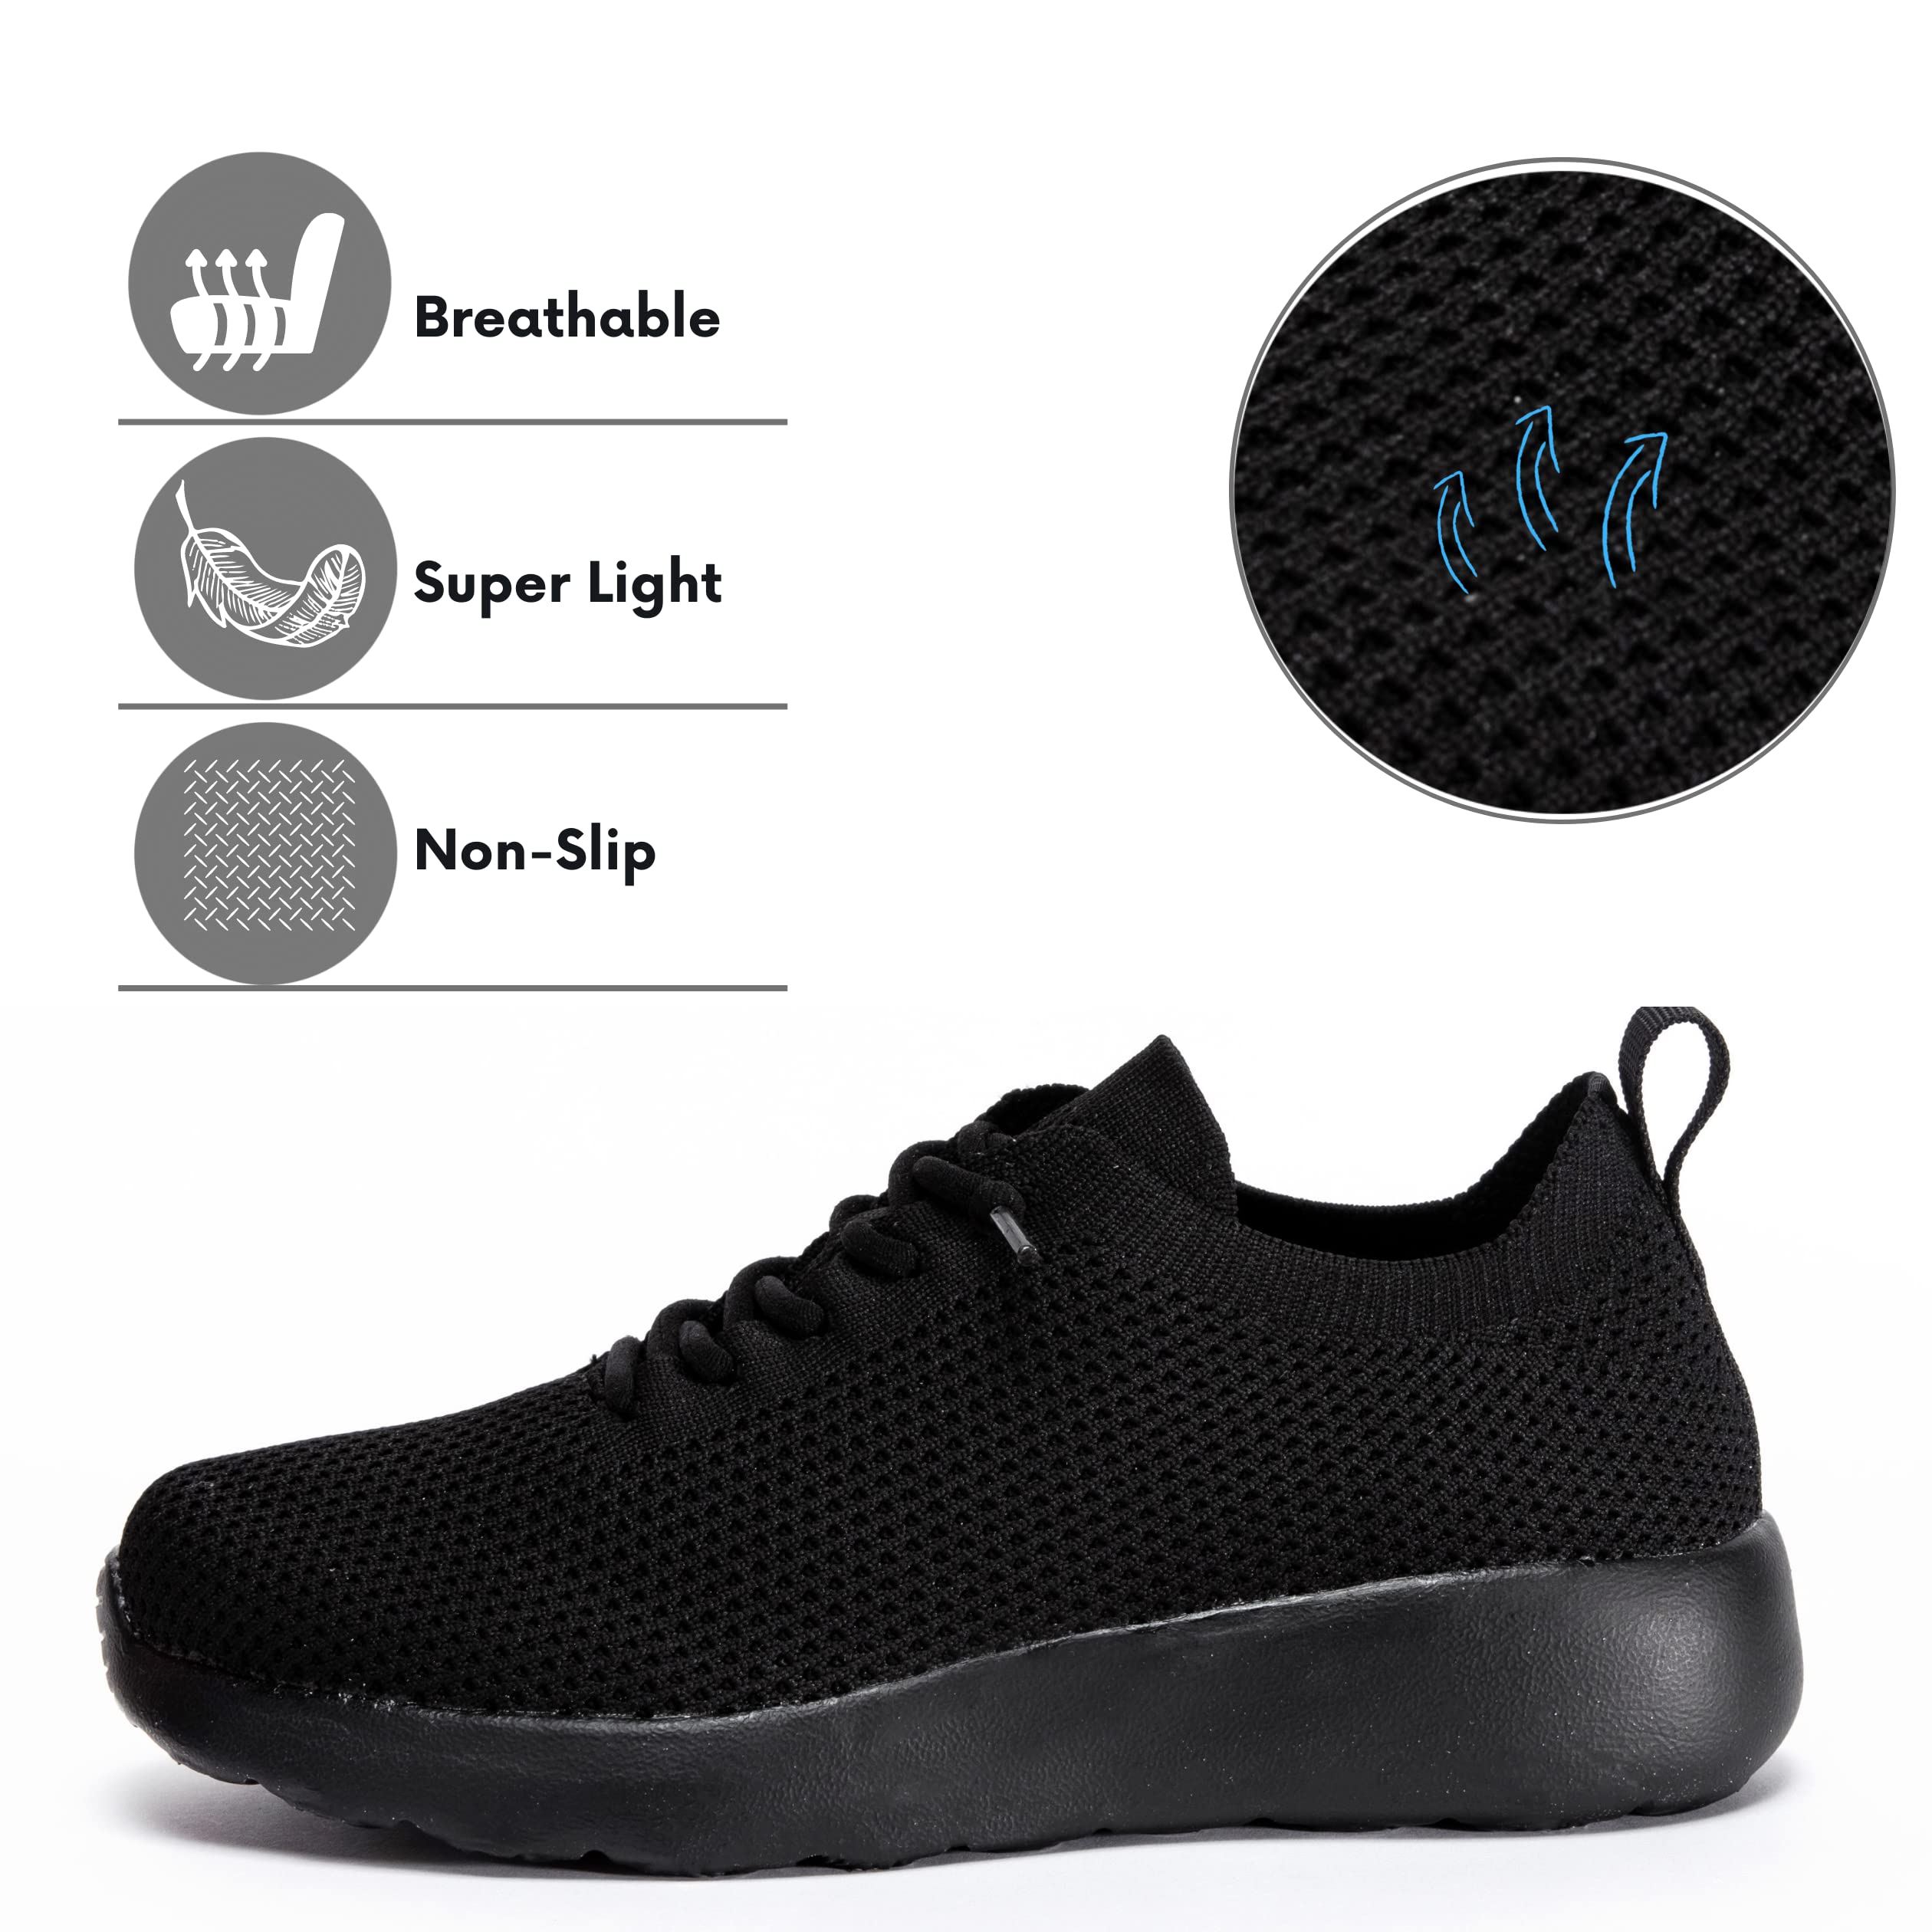 aollegat Womens Walking Shoes | Slip On Sneakers for Women |Comfy Tennis Running Shoes | Lightweight and Breathable Black